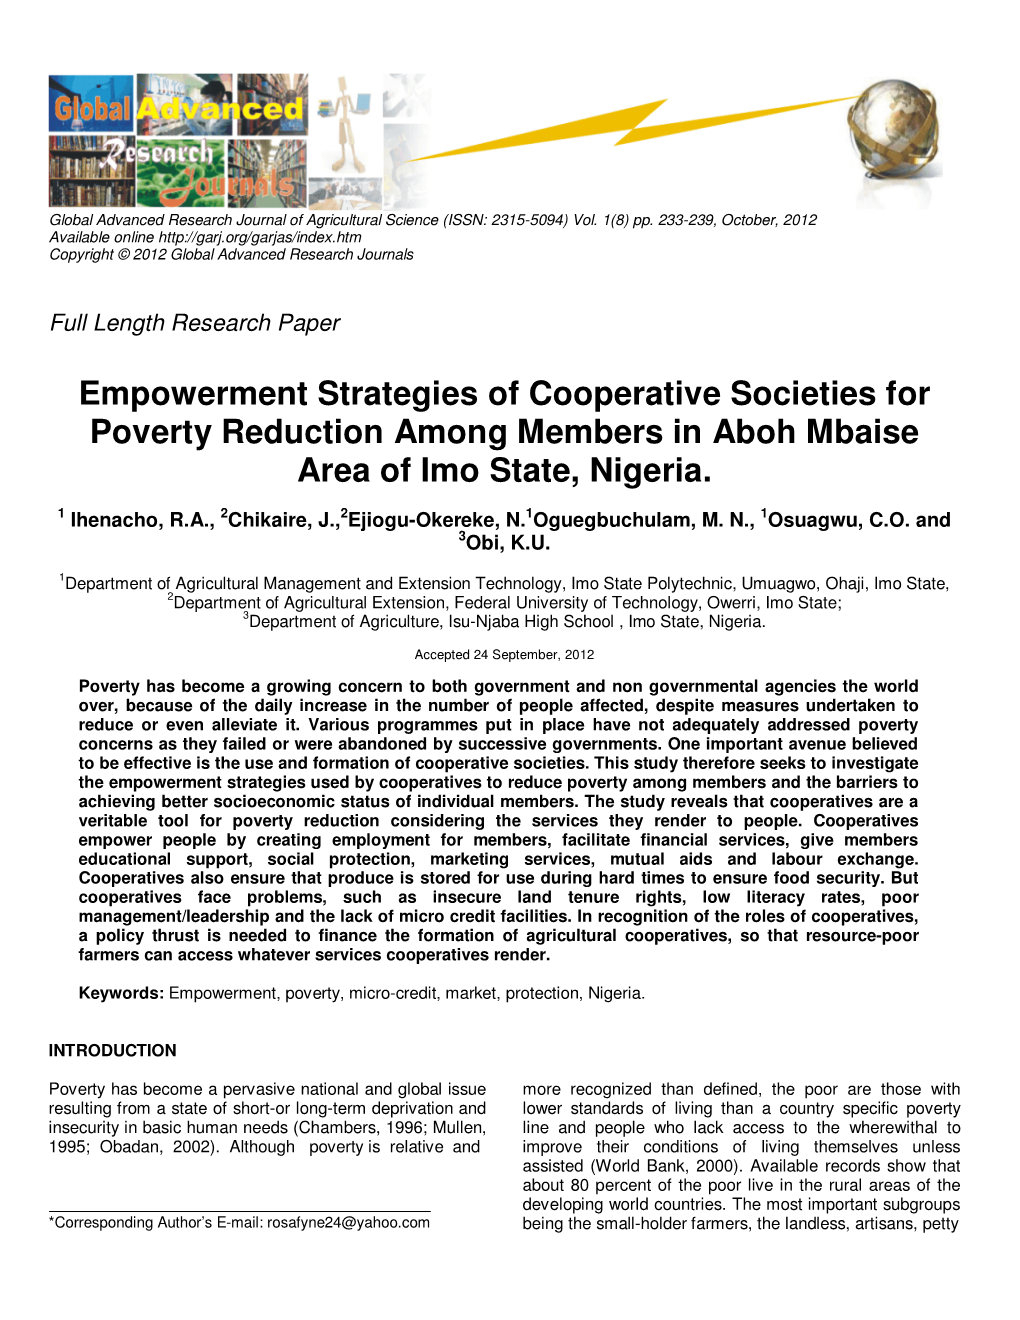 Empowerment Strategies of Cooperative Societies for Poverty Reduction Among Members in Aboh Mbaise Area of Imo State, Nigeria